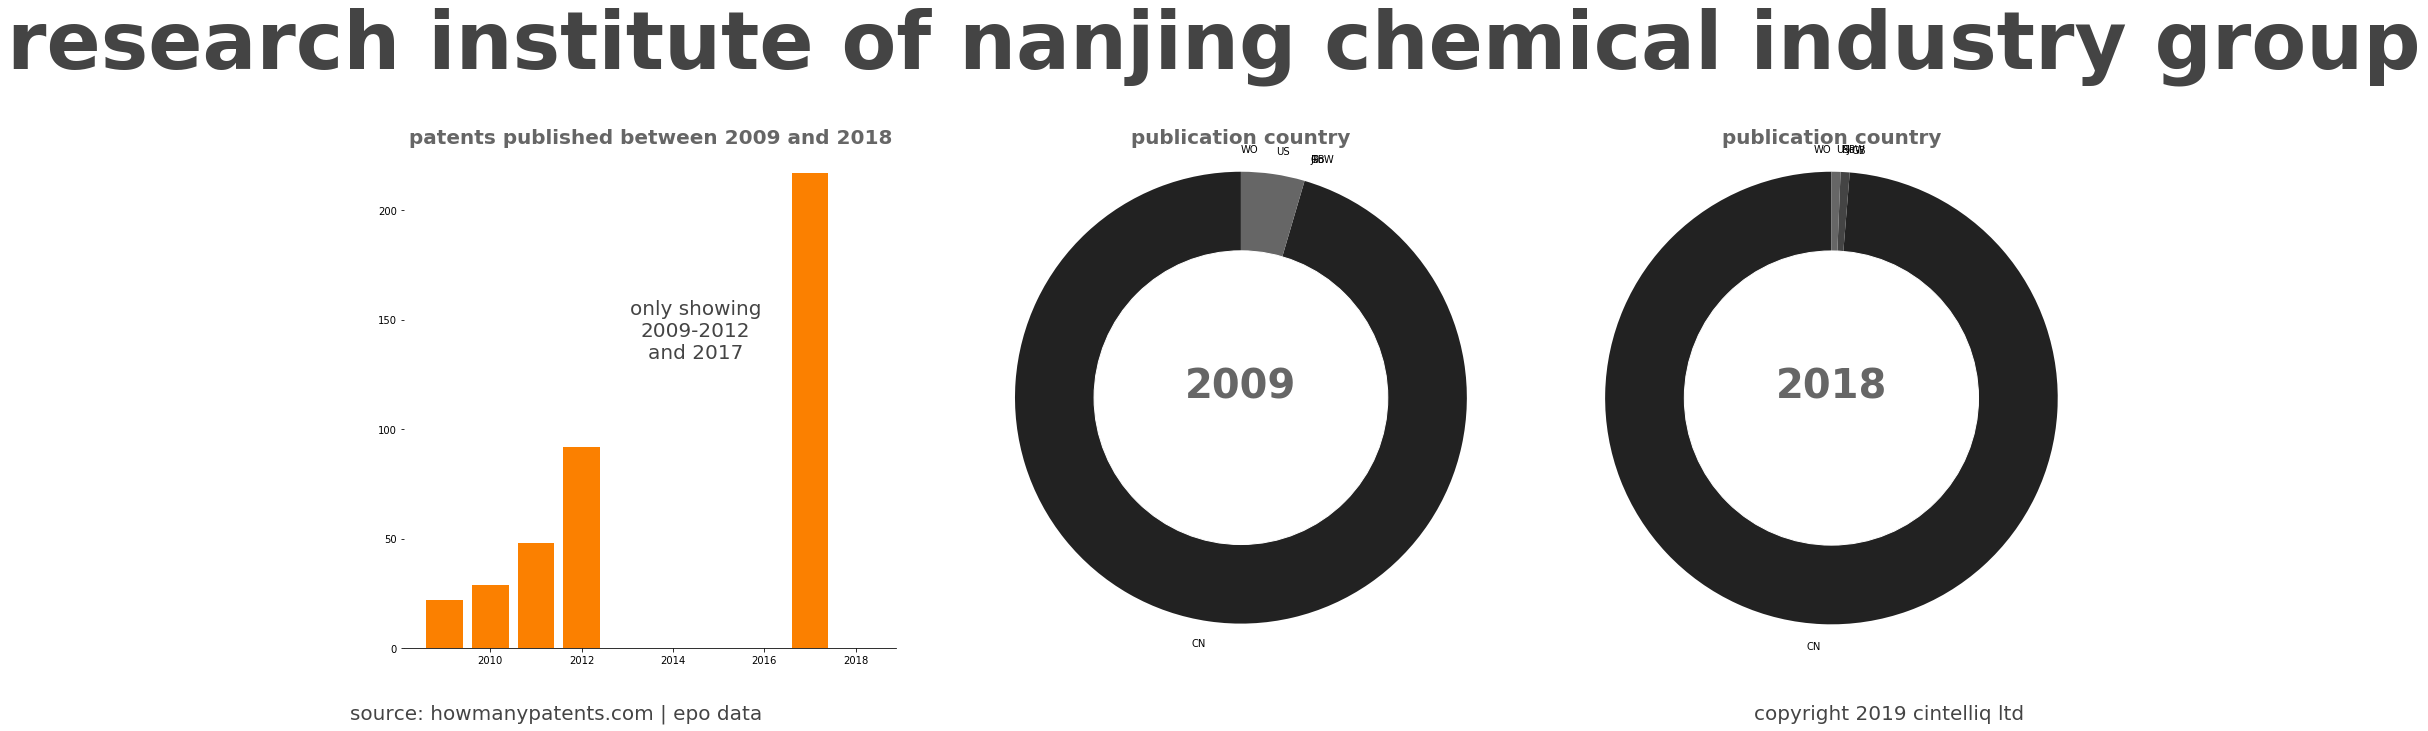 summary of patents for Research Institute Of Nanjing Chemical Industry Group